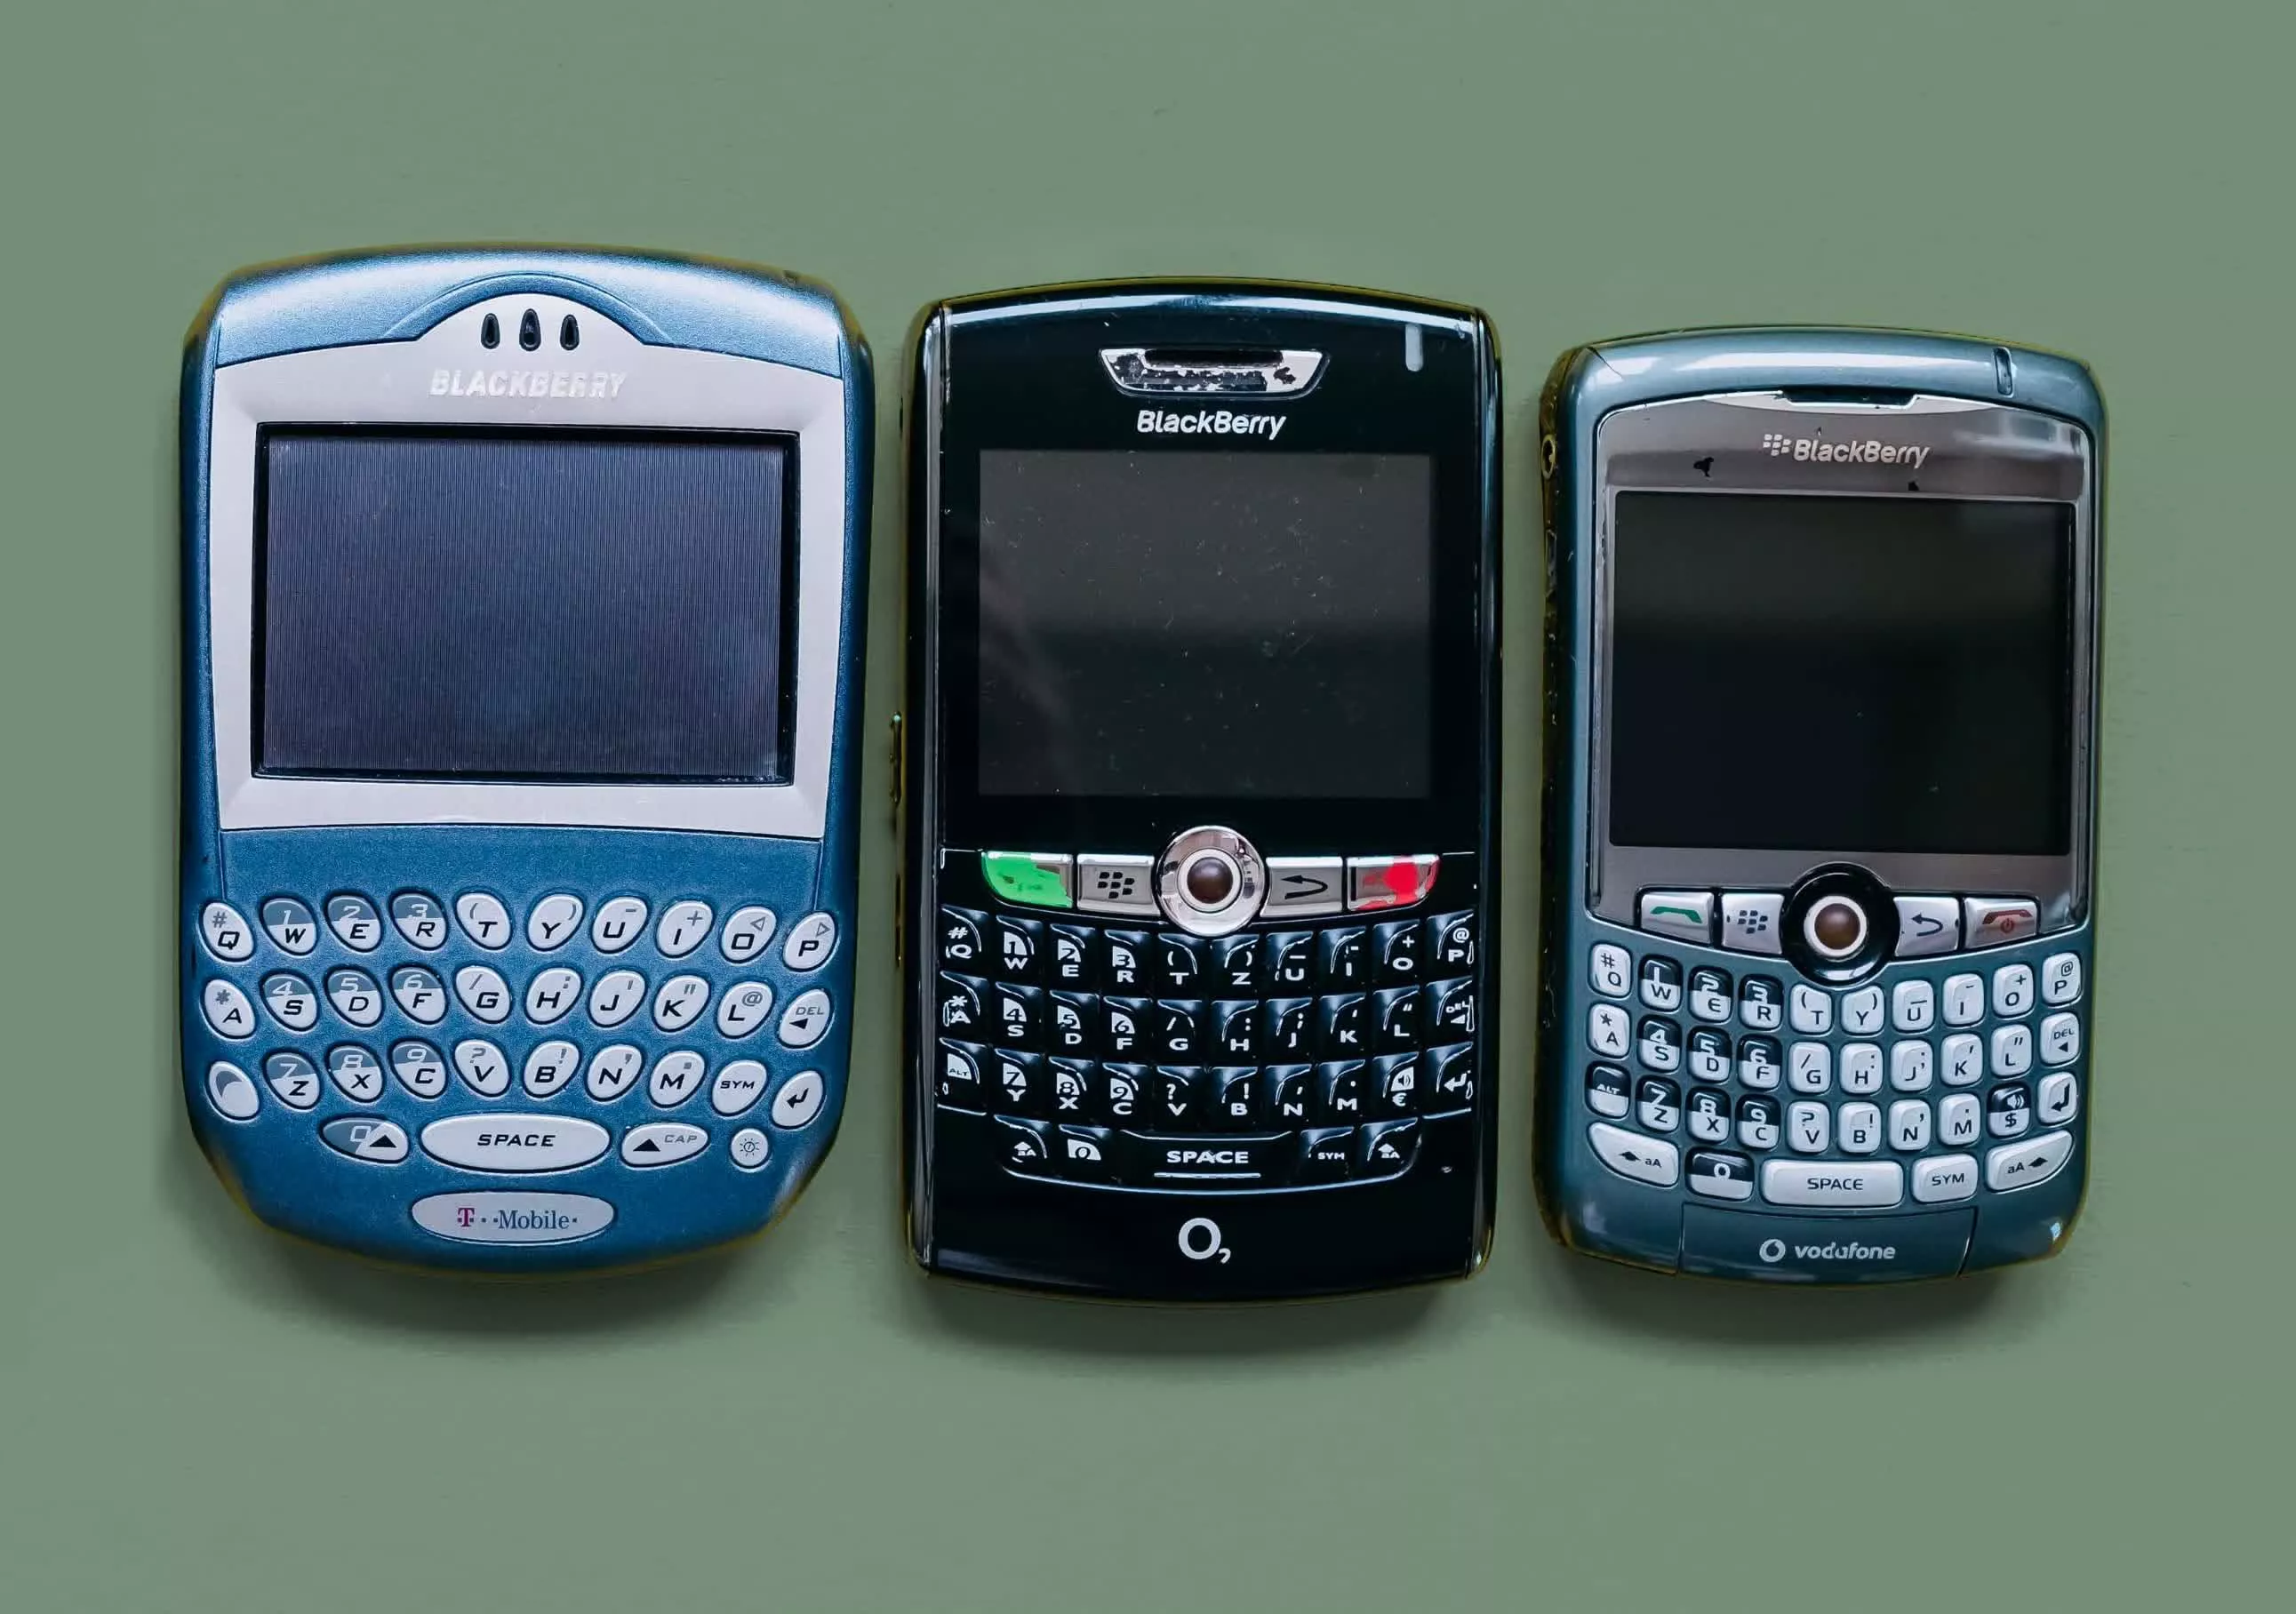 BlackBerry: The Smartphone We Knew Earlier than the iPhone